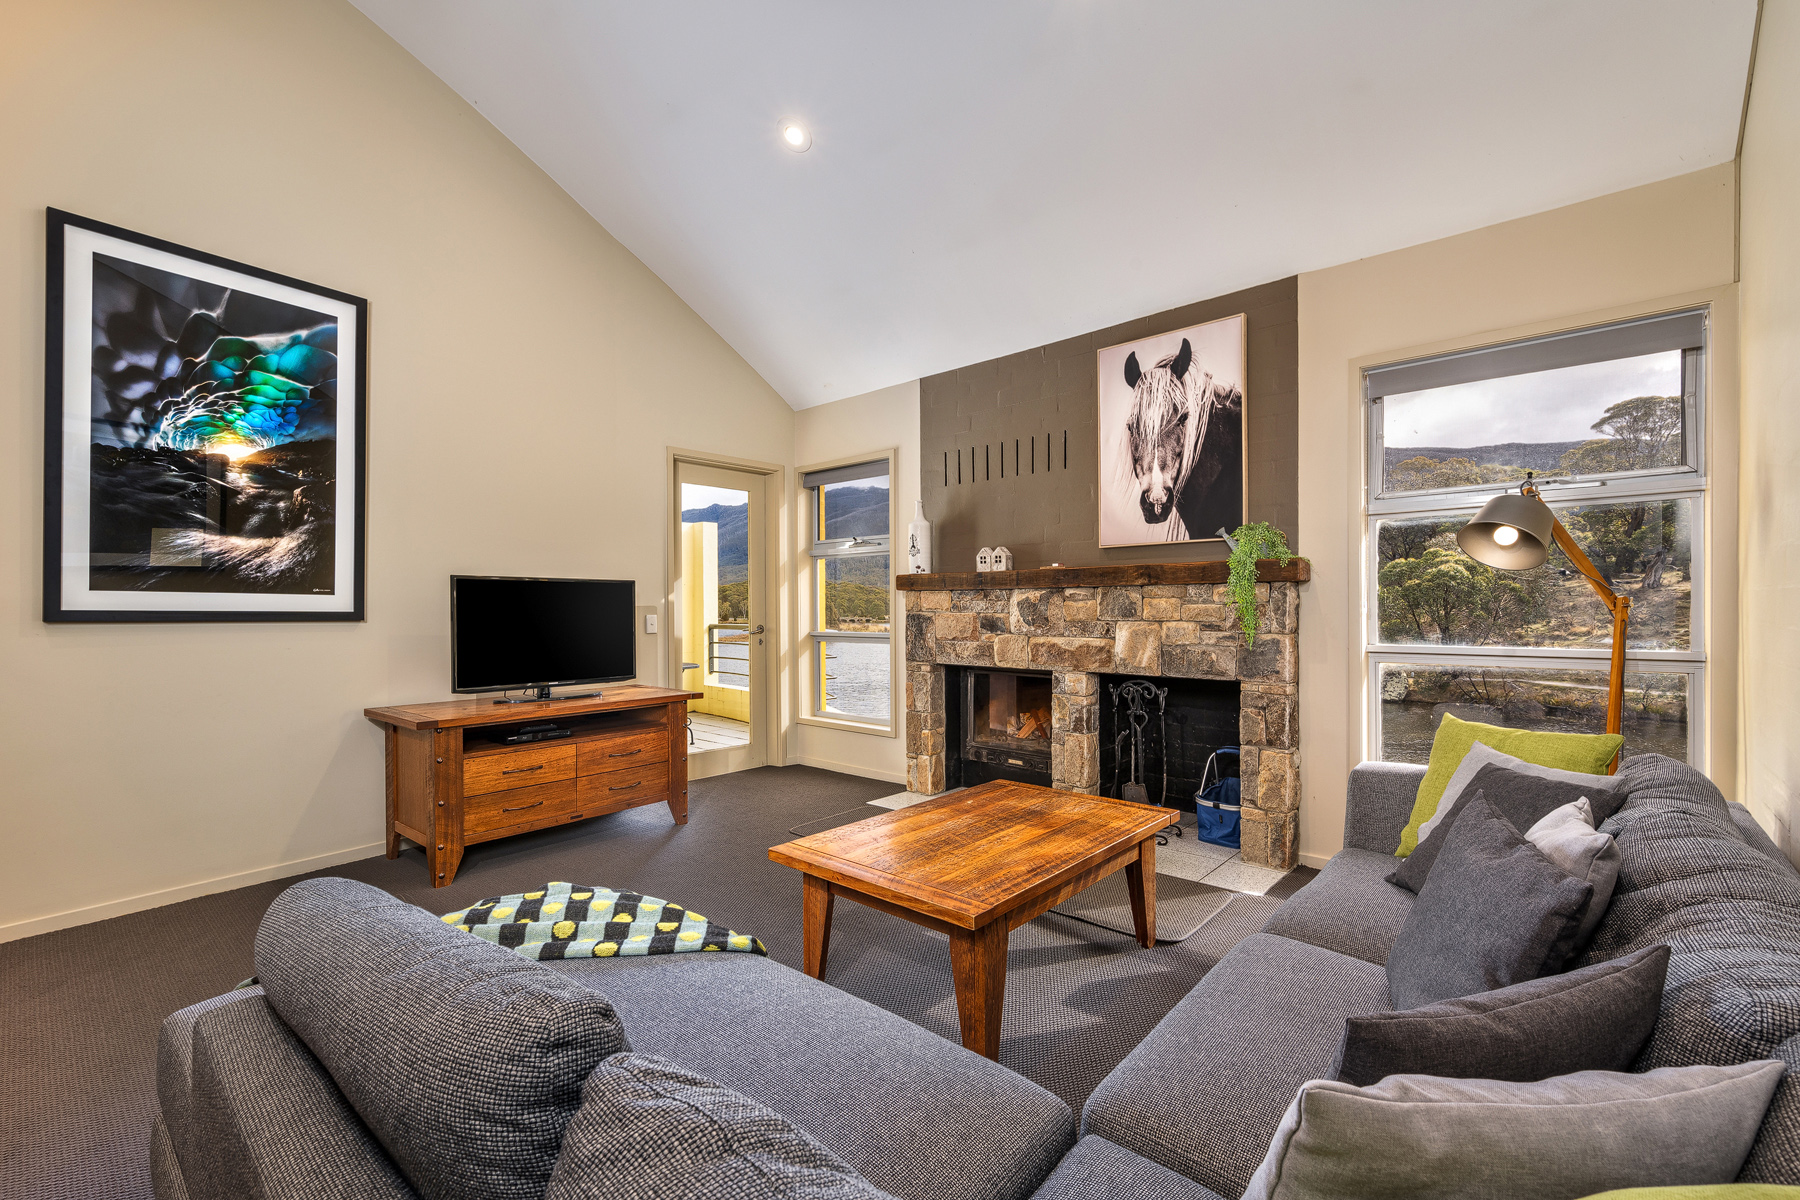 Lake Crackenback, Two Bedroom + Loft Lakeside Apartment – Price: Offers invited over $700,000